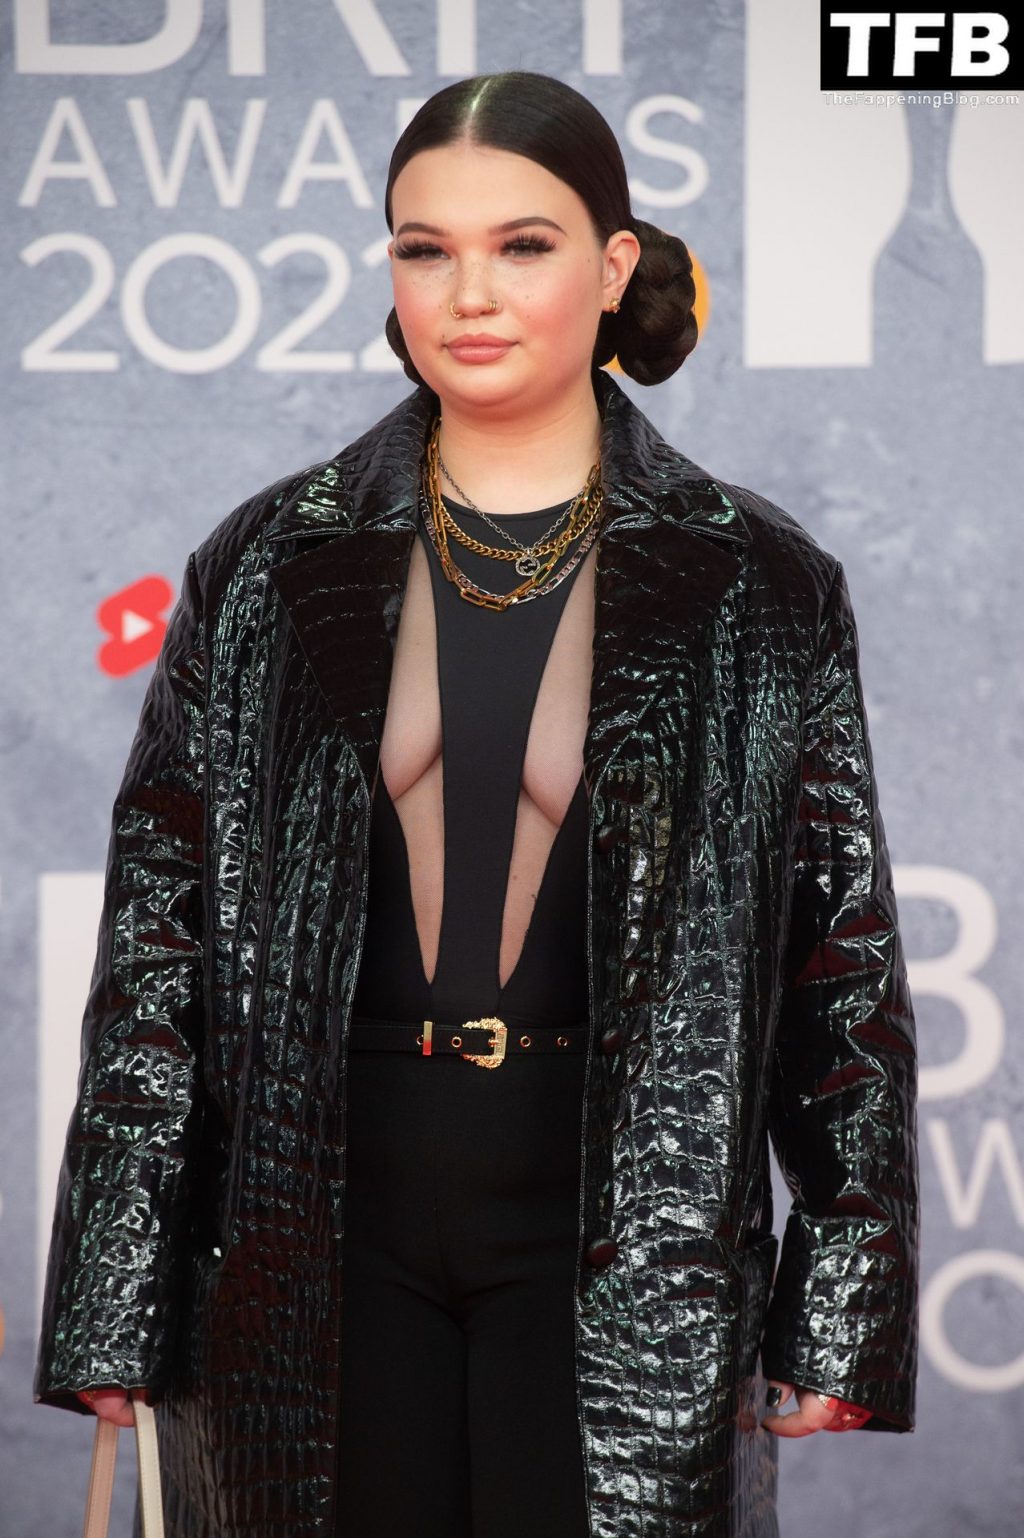 Lola Young Flaunts Her Tits at the BRIT Awards 2022 (36 Photos)